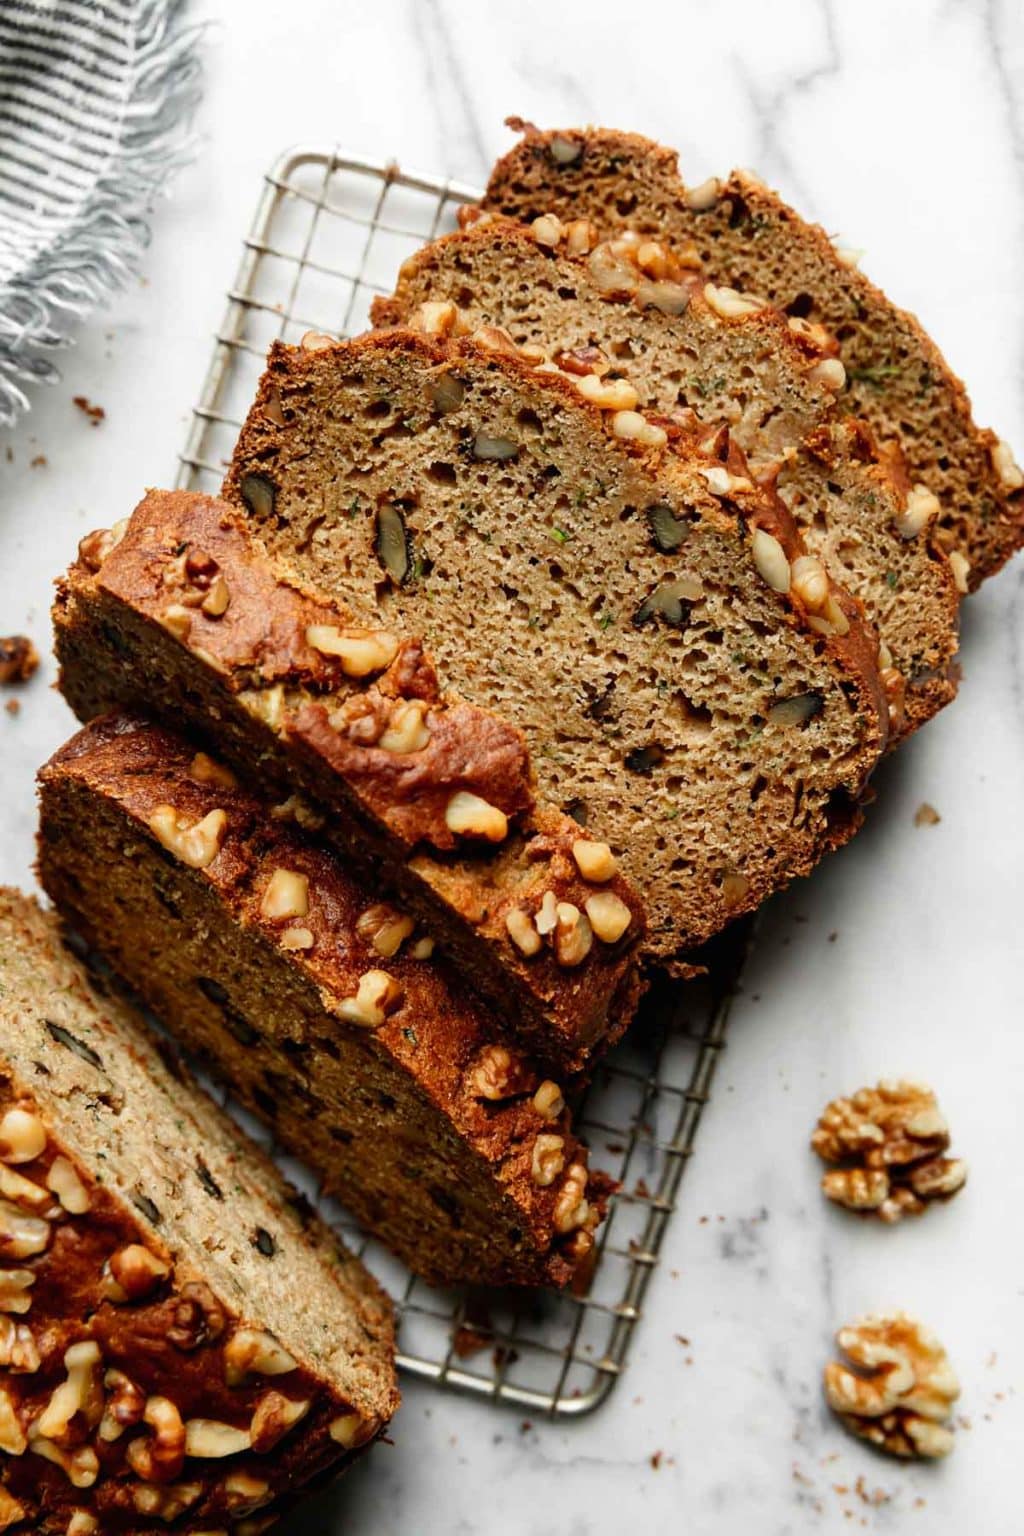 Healthy Gluten-Free Zucchini Bread - The Real Food Dietitians